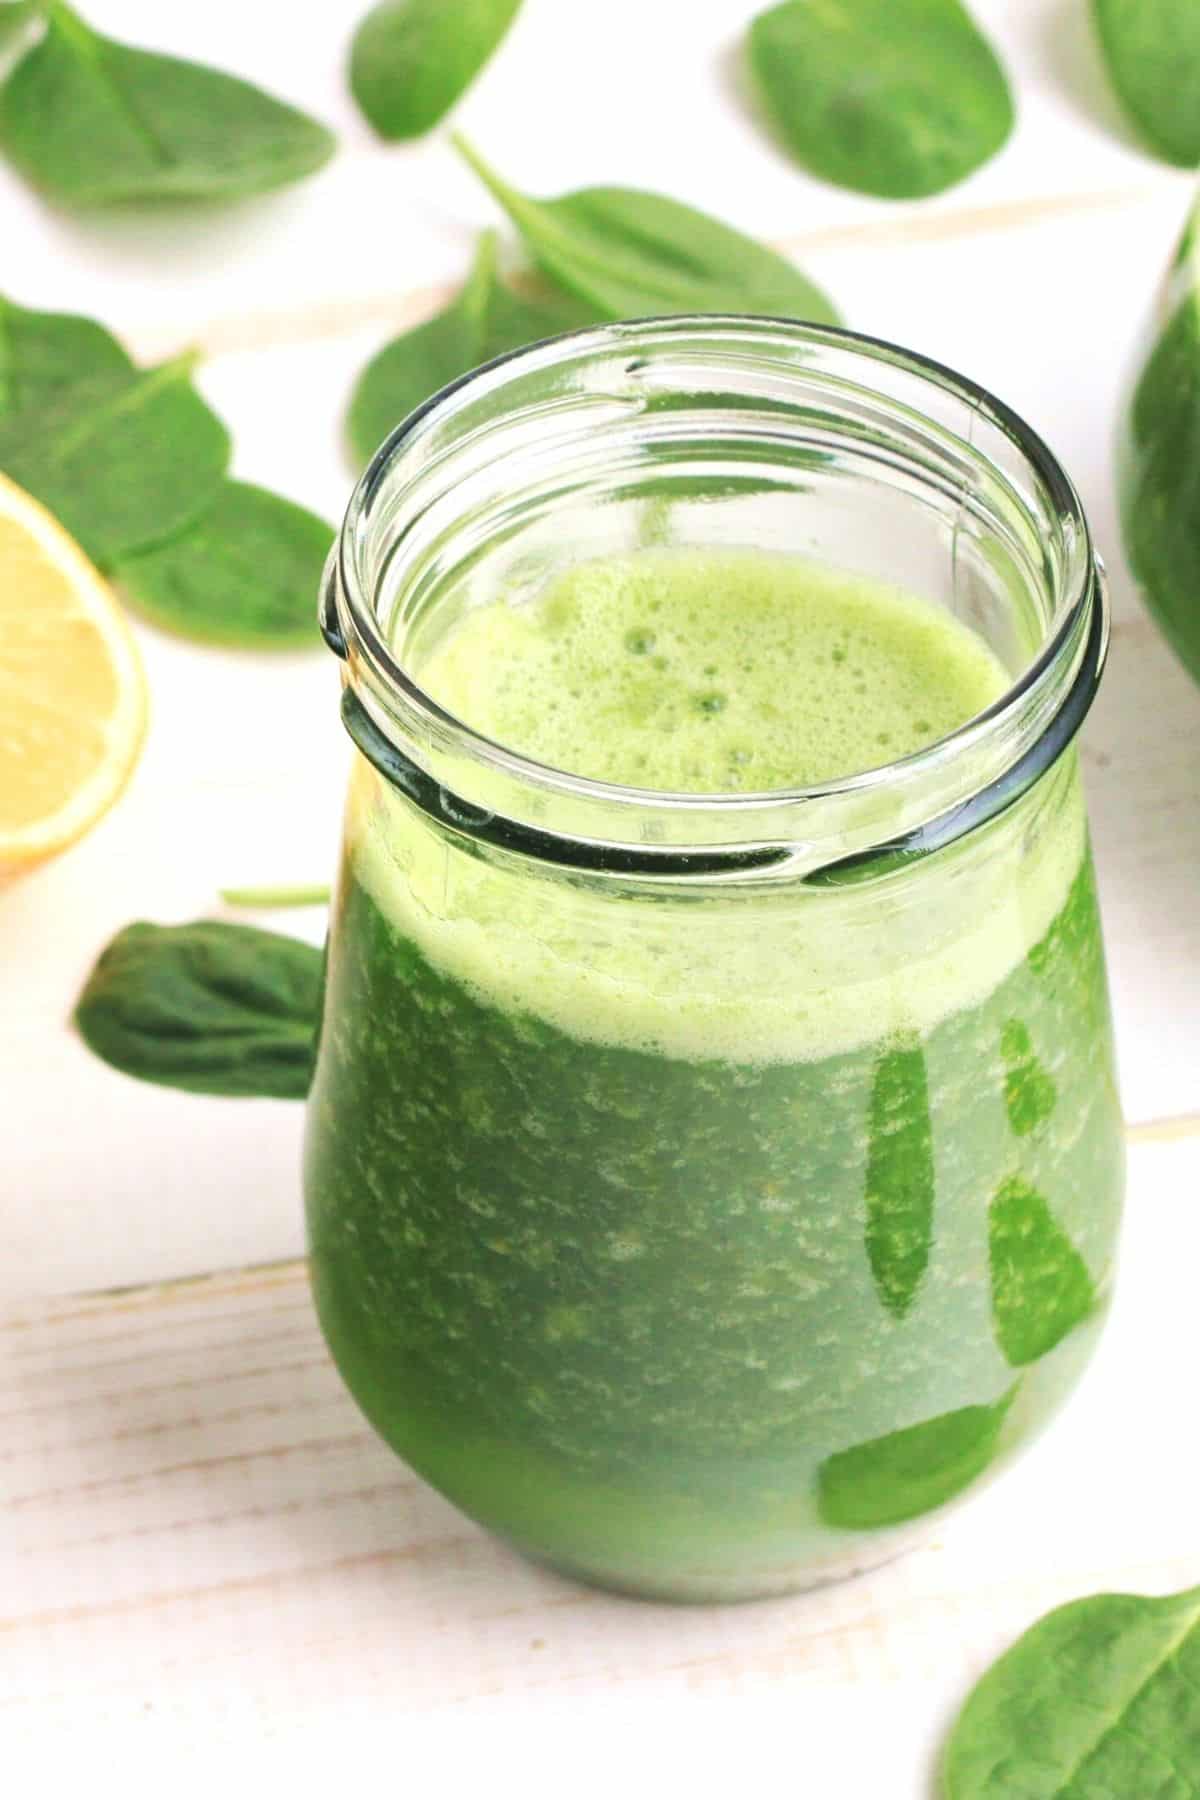 Can I Use A Juicer To Make Smoothies? 